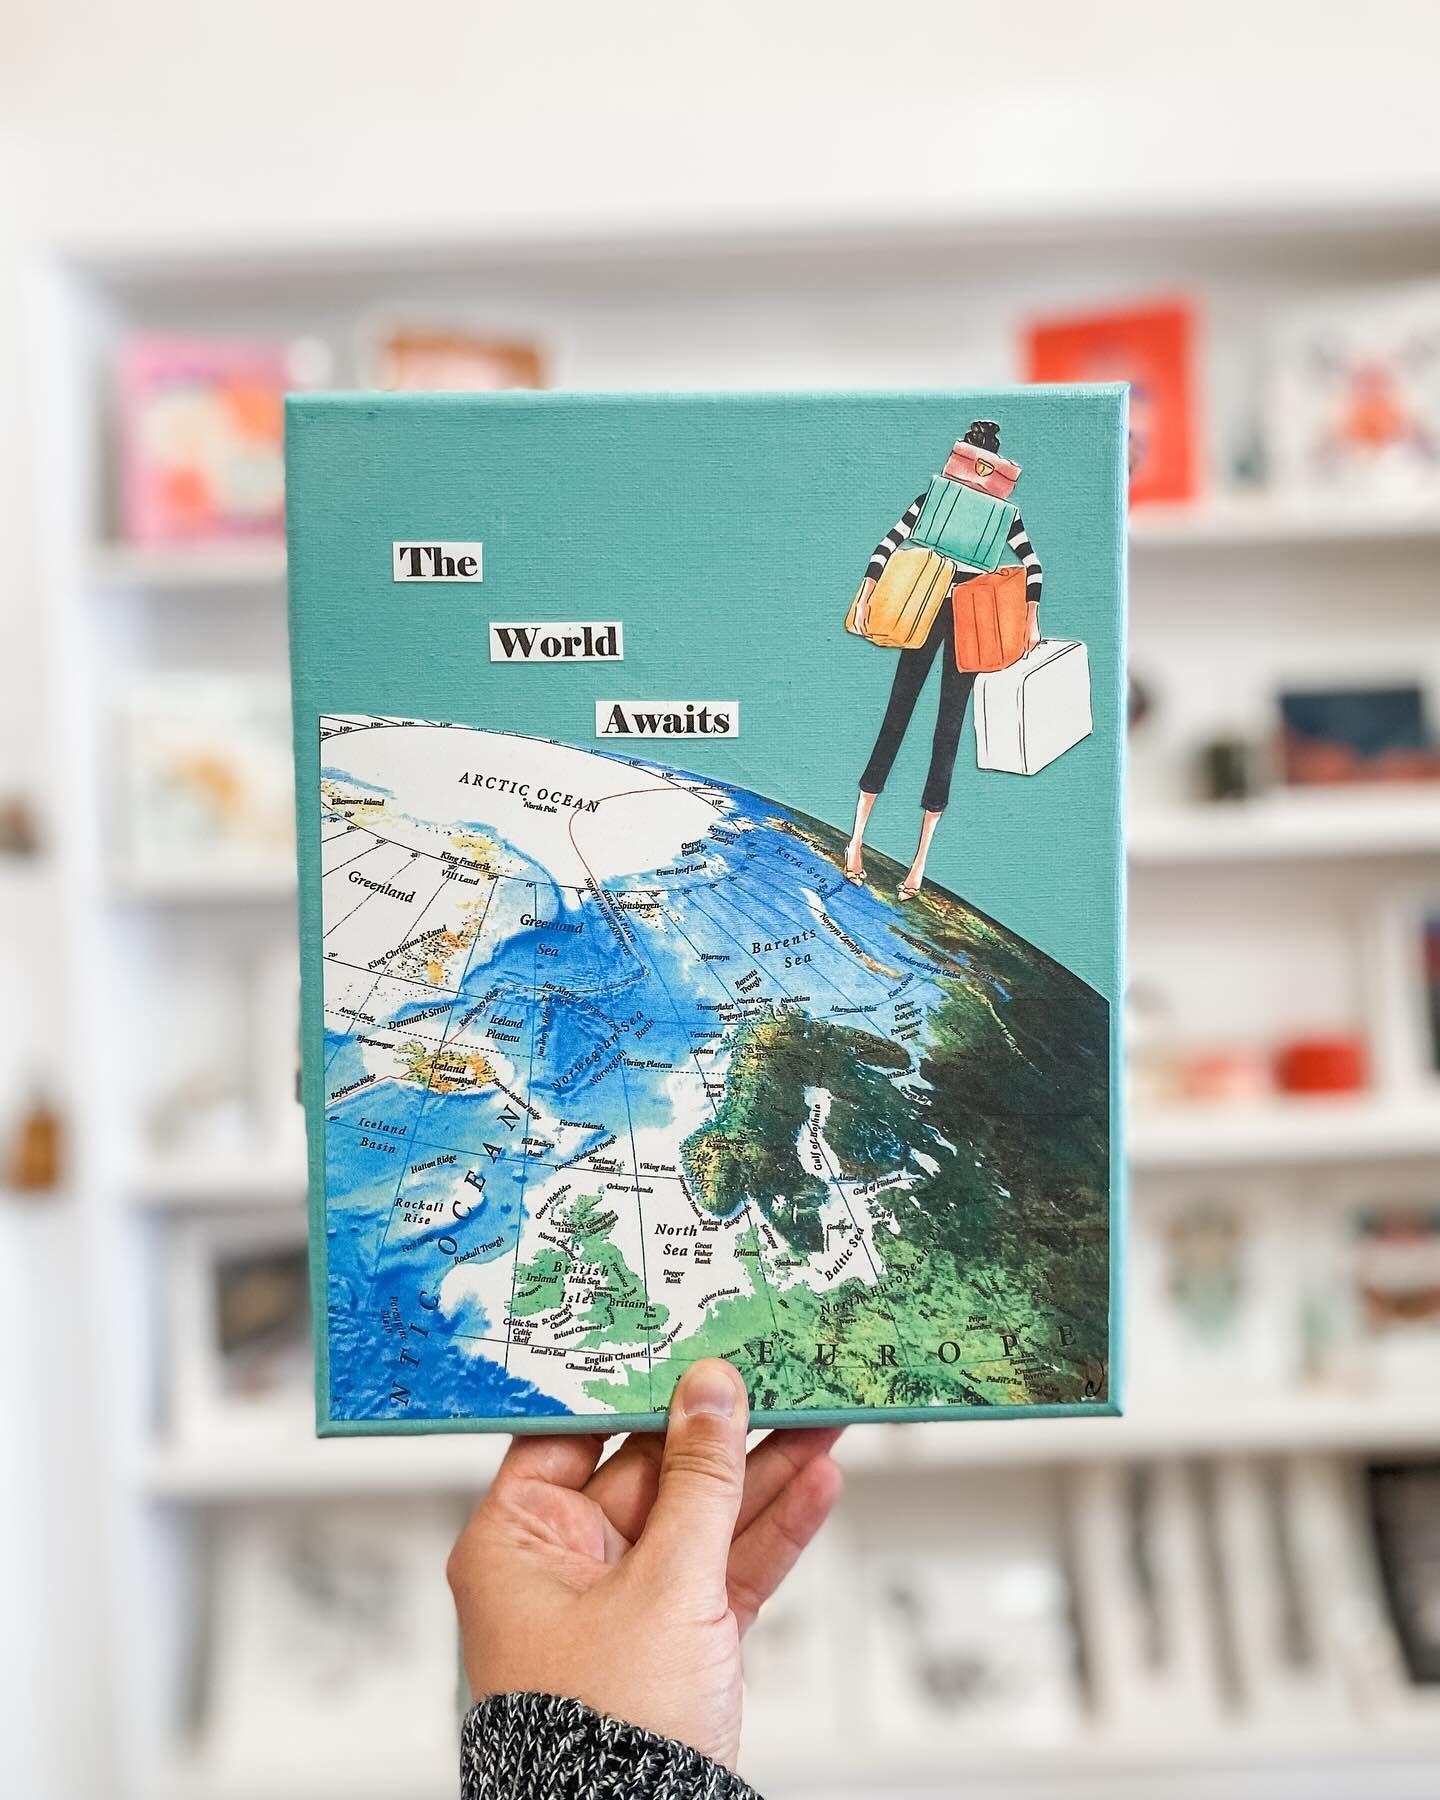 The world awaits! 🗺️ Do you have travel plans this summer? Share your trip plans in the comments and let&rsquo;s bask in the wanderlust this Sunday! 👇

🙌 Original collage by @inn_retrospect 
.
.
.
.
.
.
.
.
.
.
#LiveLoveMOV #MariettaOhio #MyMariet